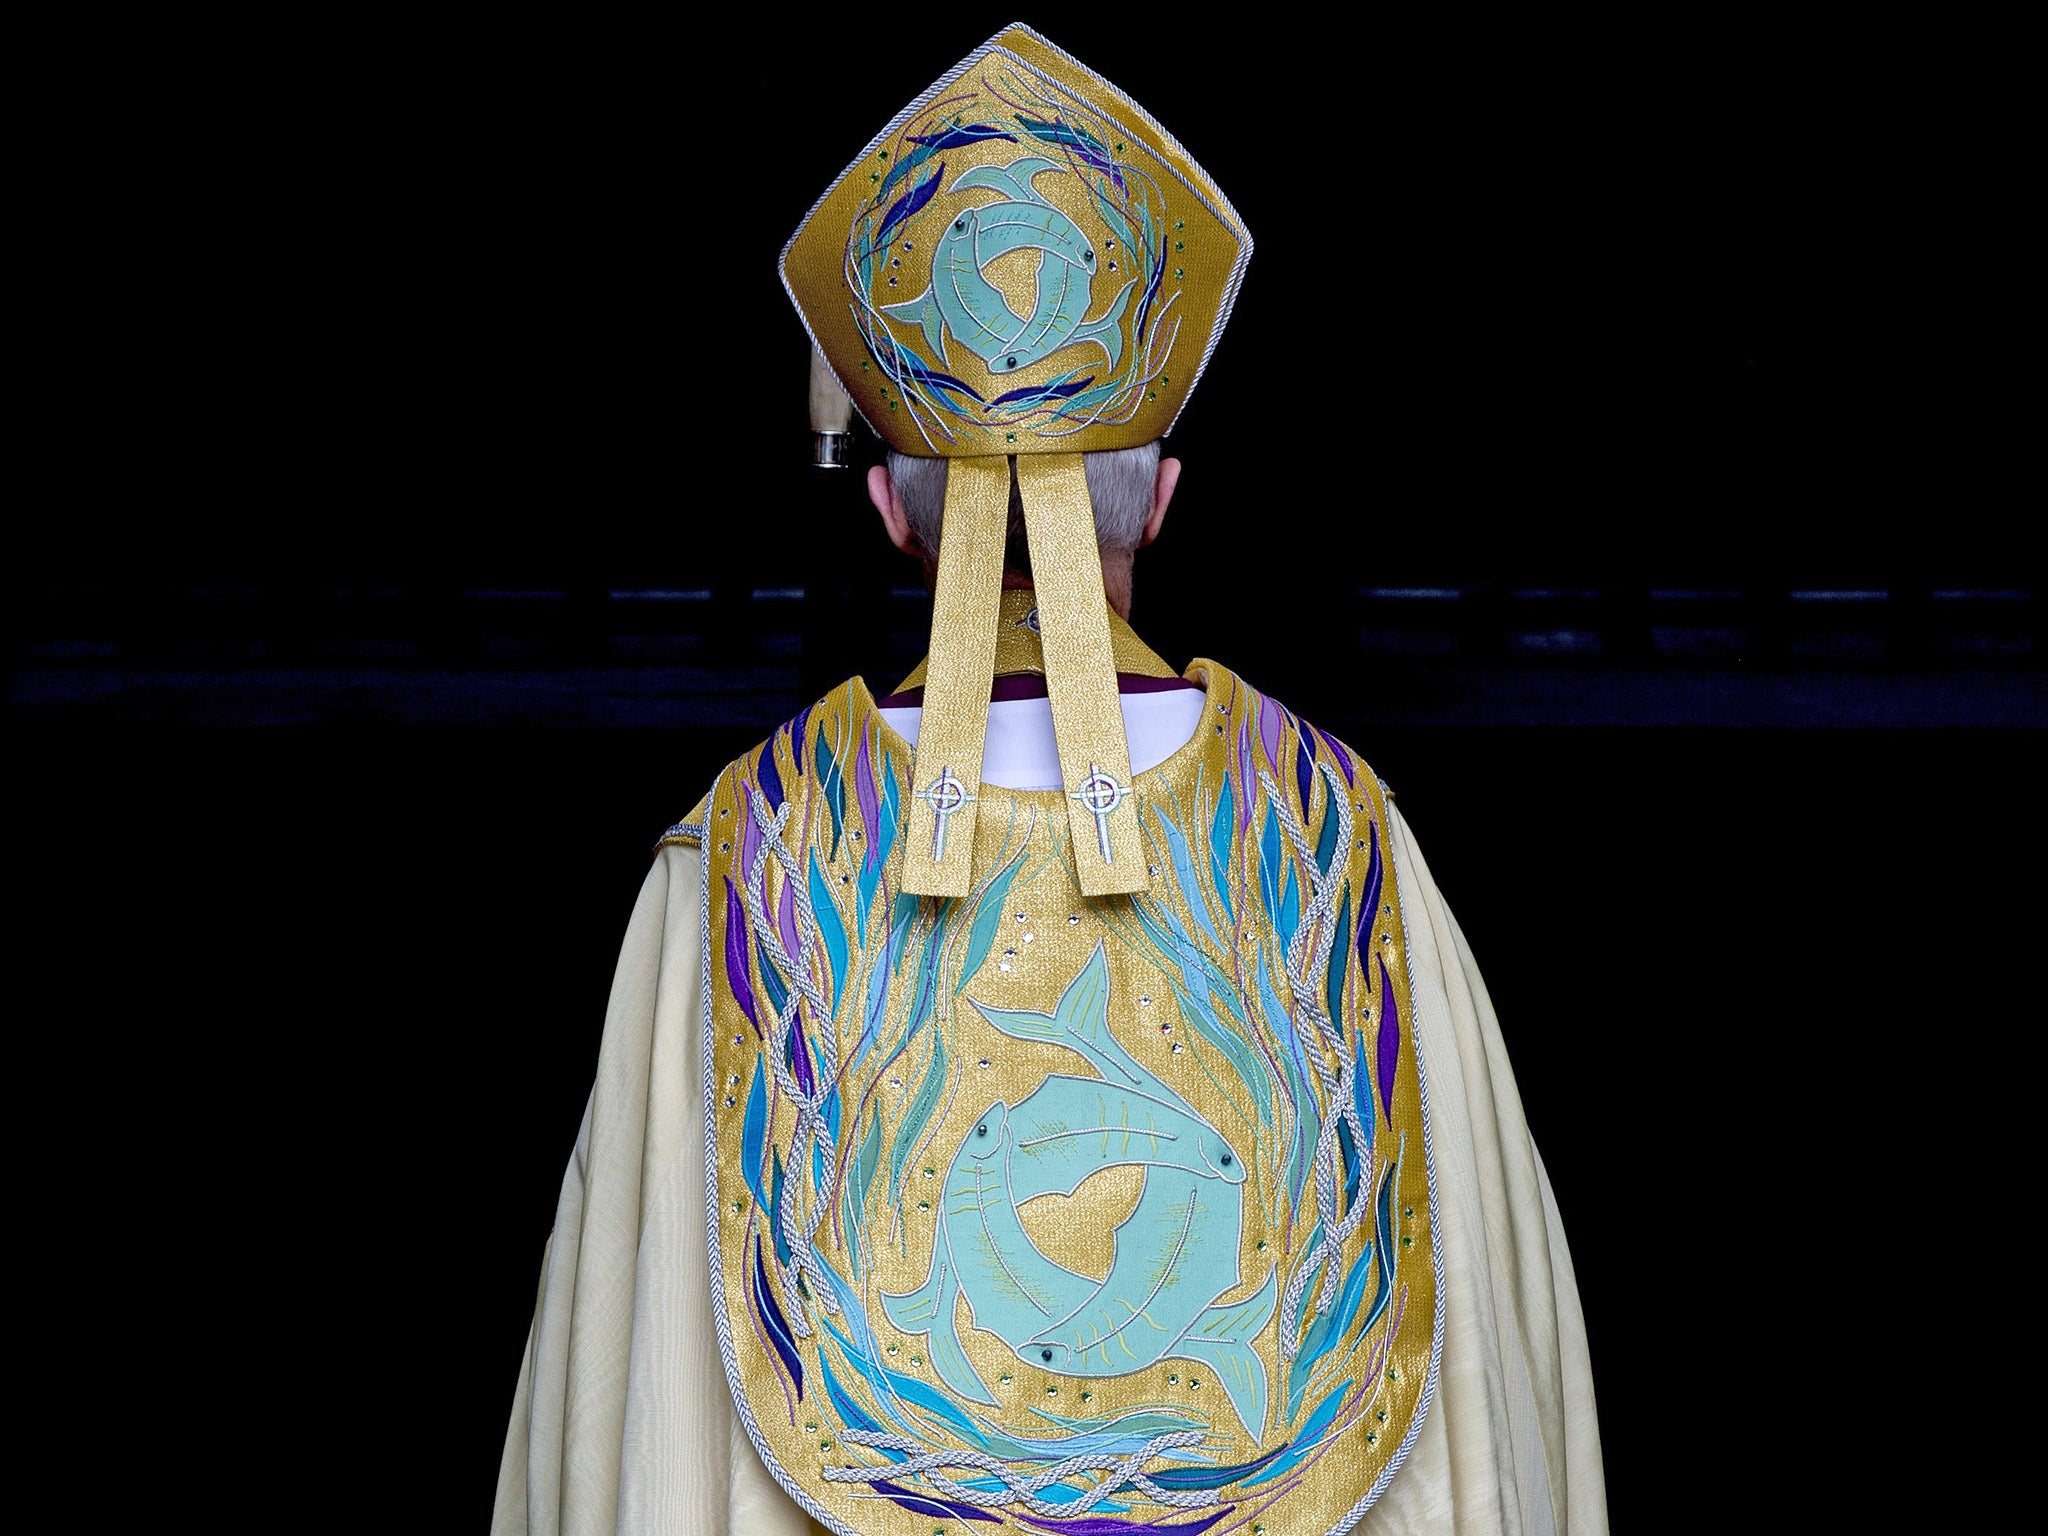 Bishop Broadbent said mitres, robes, croziers, and staffs, could help Bishops look 'imposing' in cathedrals